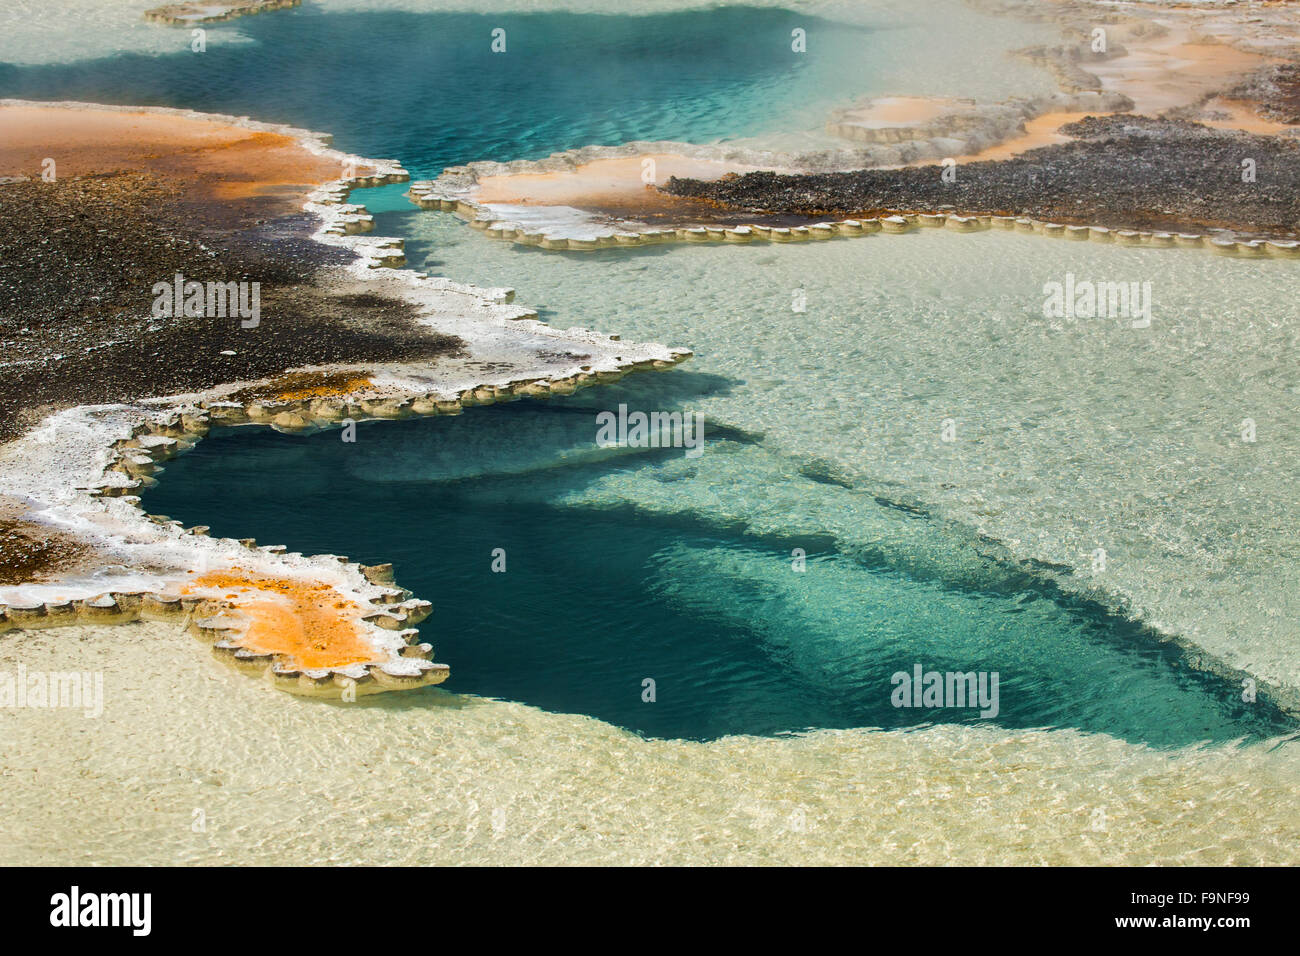 Deep aqua blue pool of a hot spring, with orange margins and foggy steam in a geothermal area of the Yellowstone caldera. Stock Photo